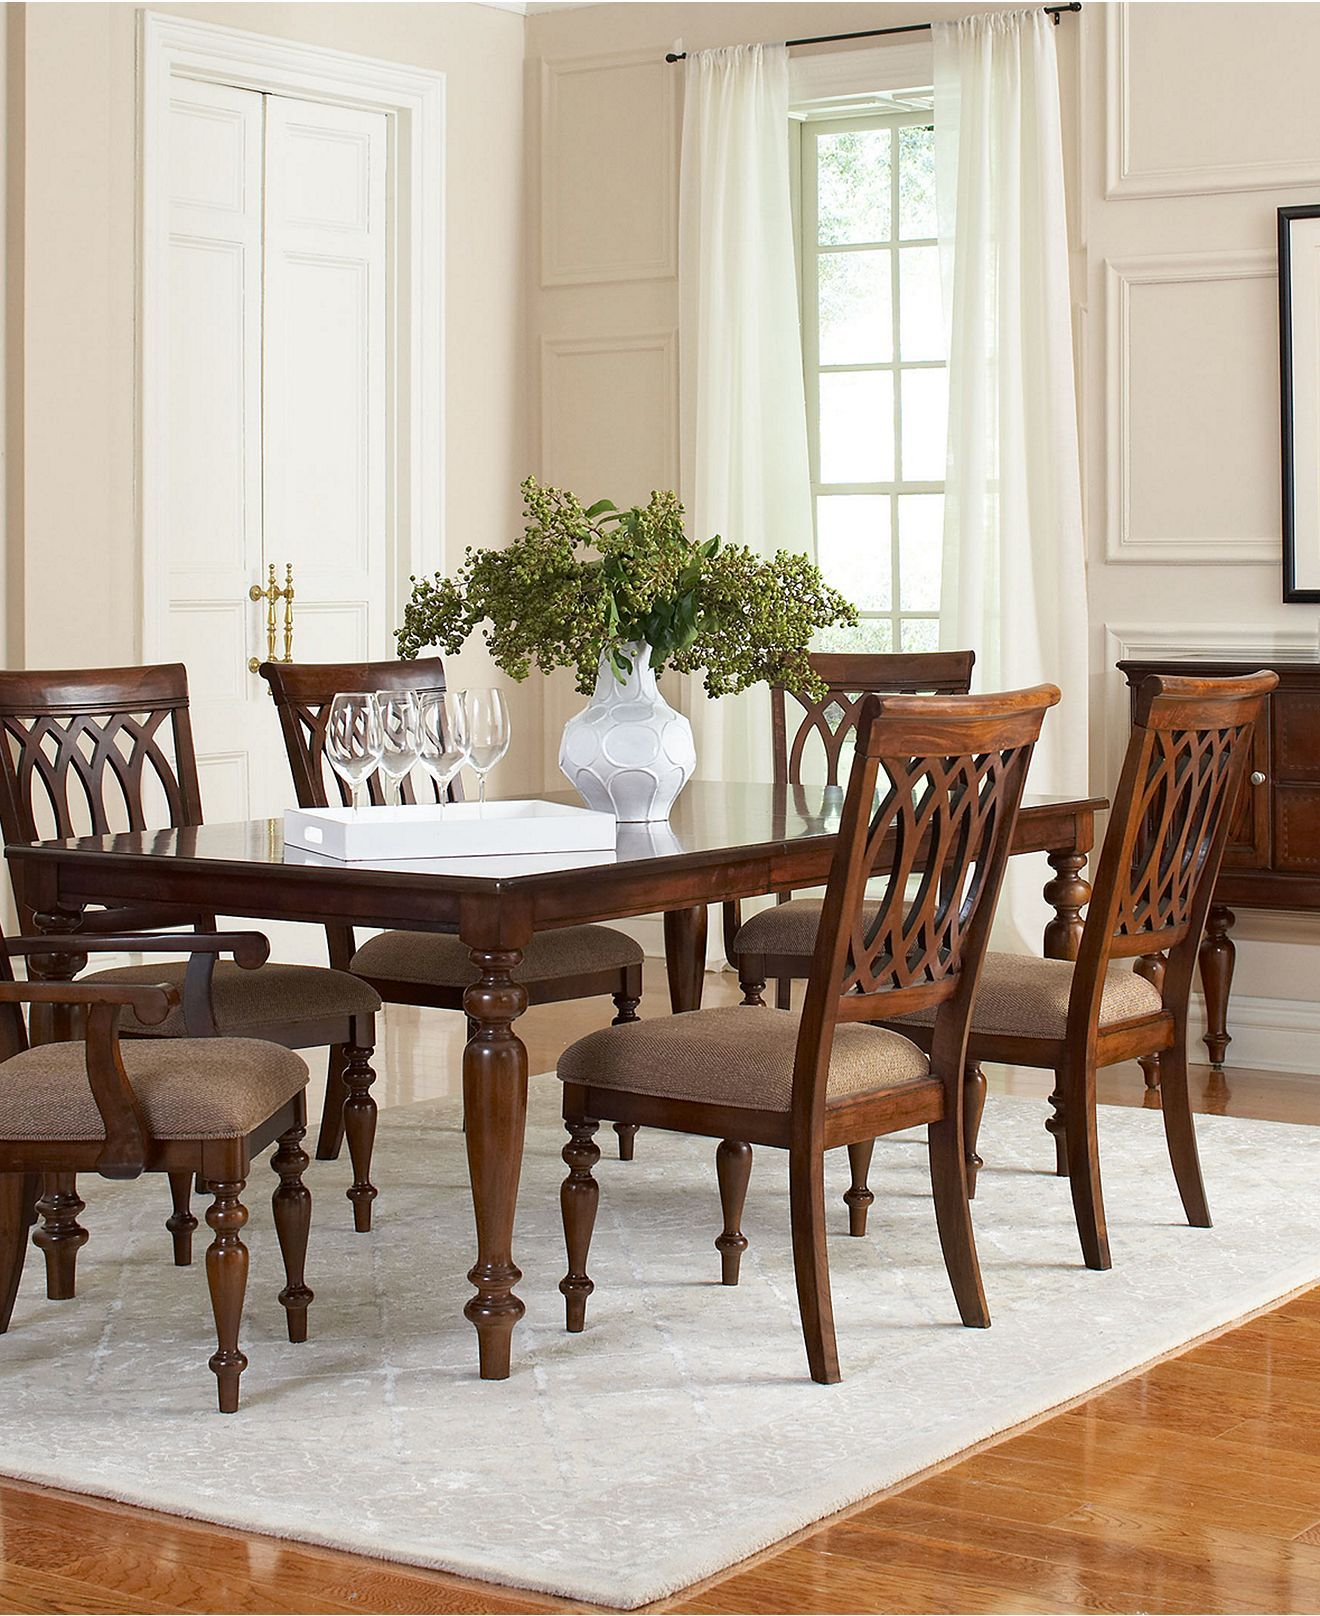 Crestwood Dining Room Furniture Collection Dining Room regarding measurements 1320 X 1616